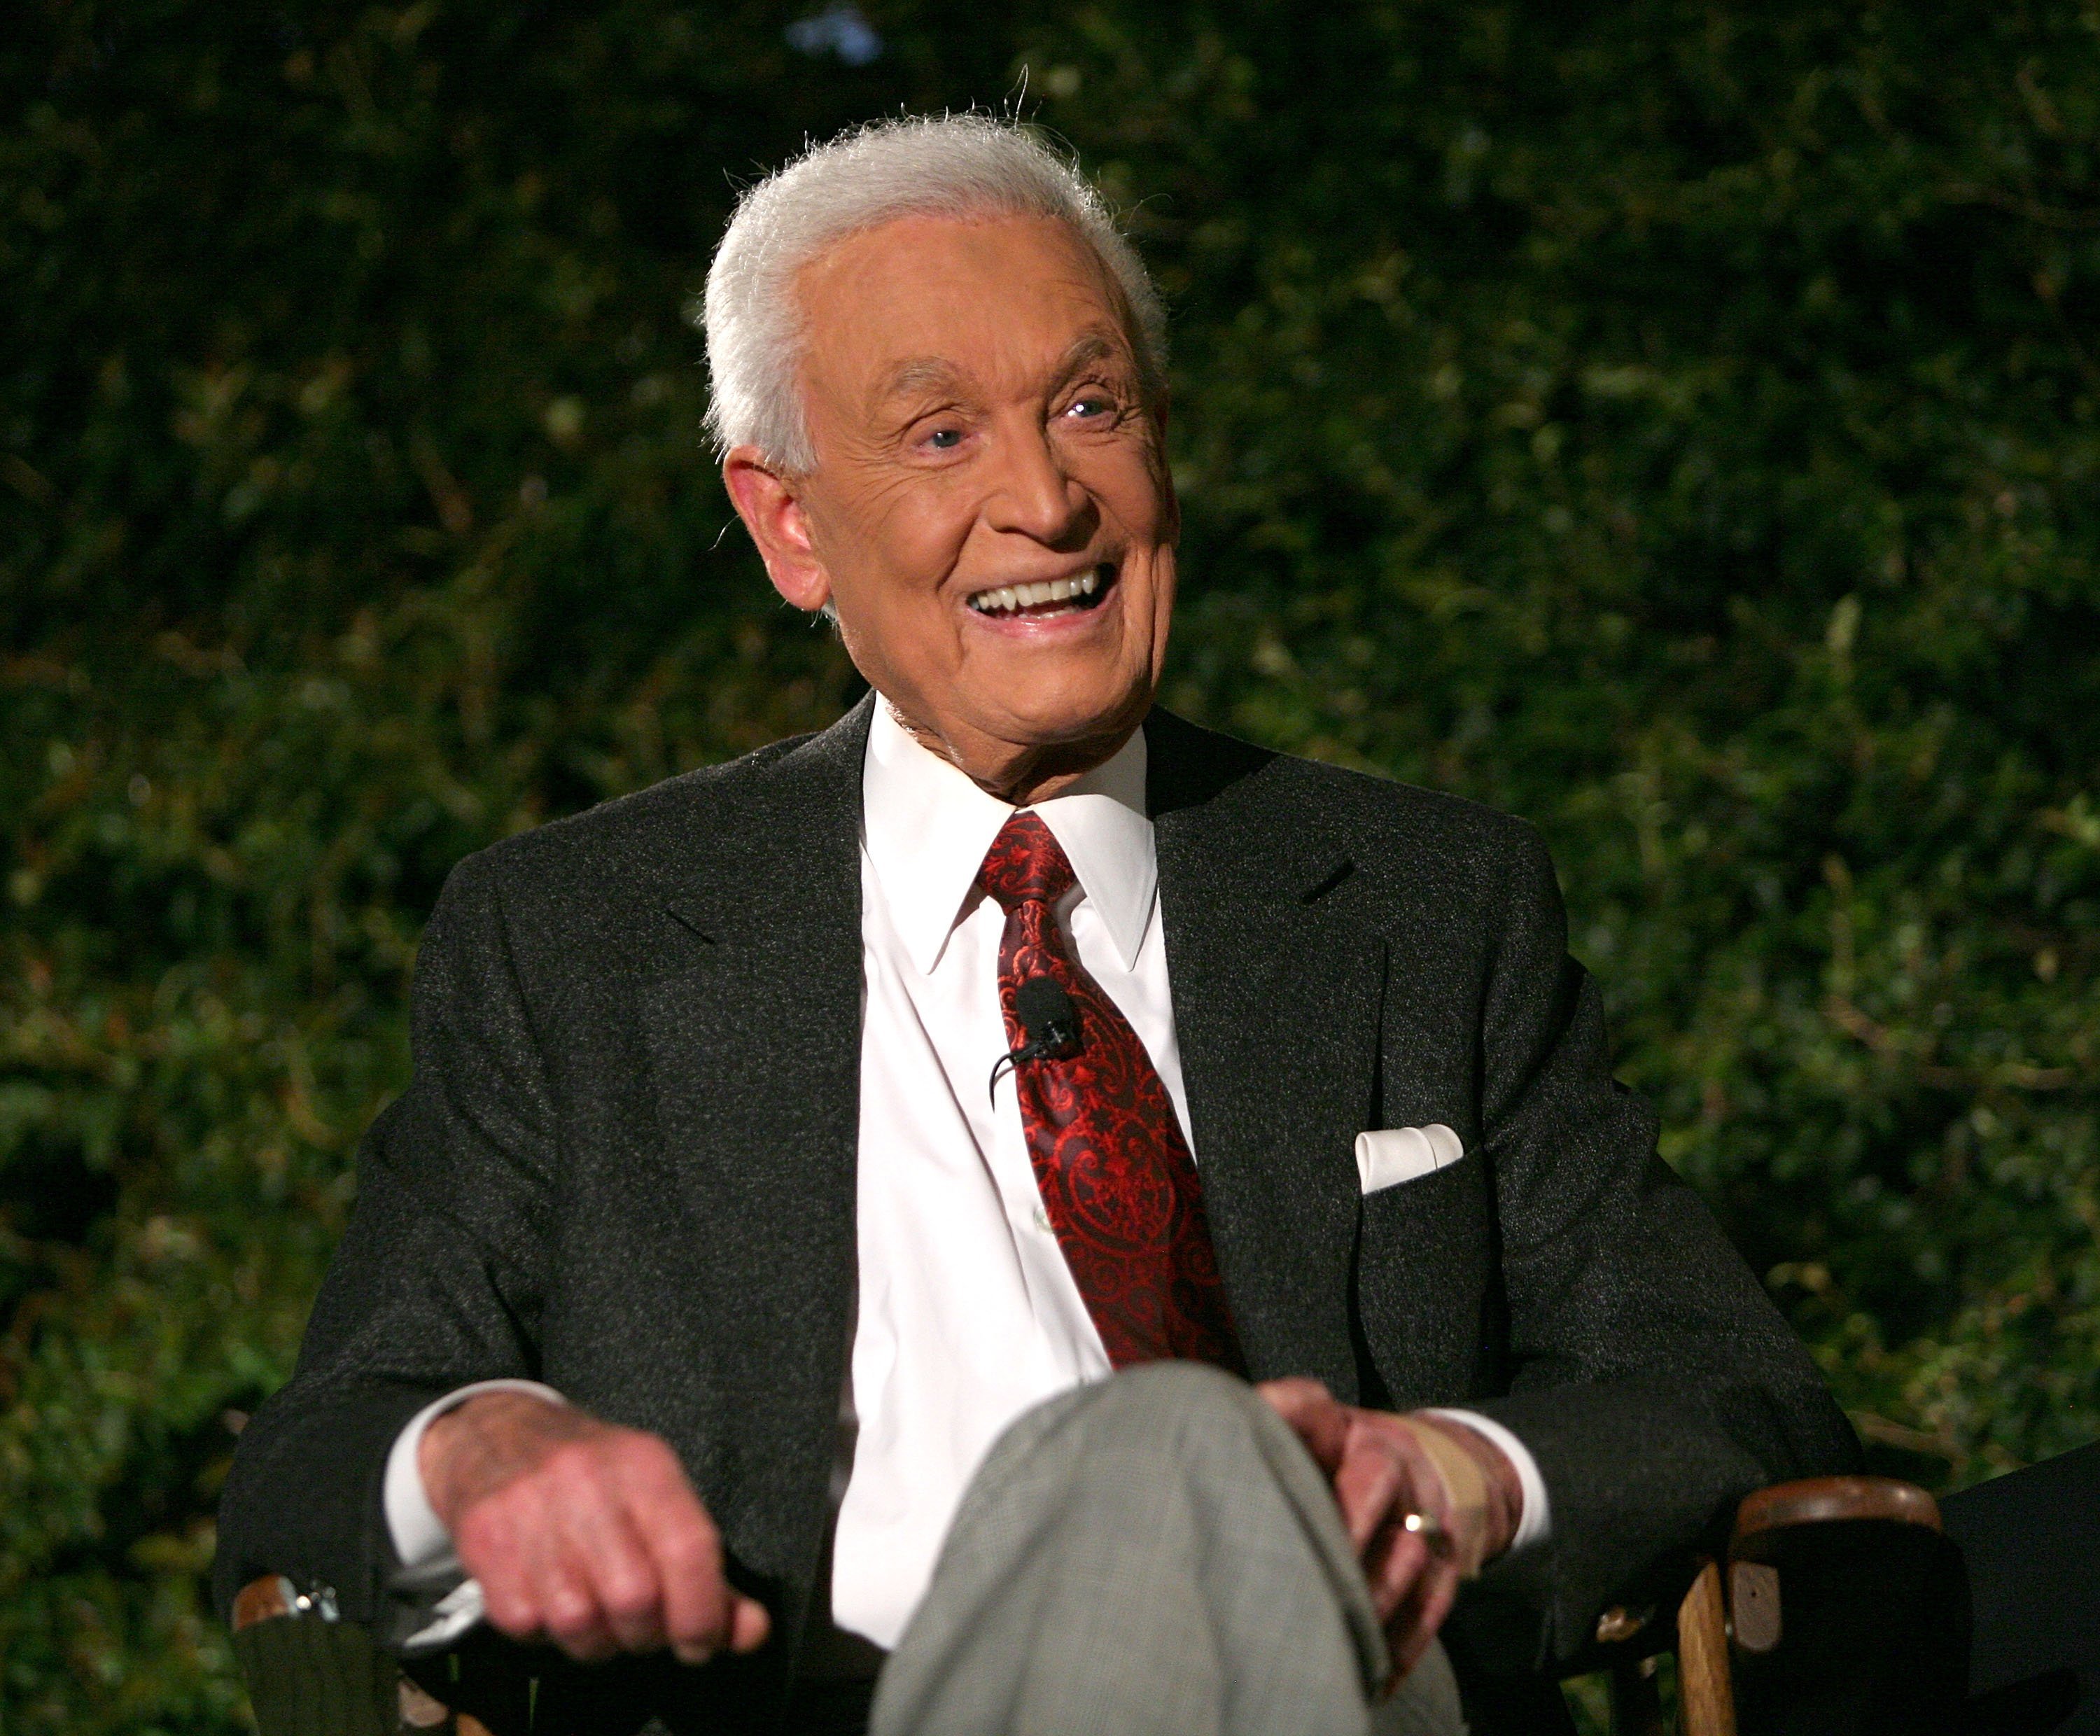 Bob Barker attends An Evening With Bob Barker presented by the Academy of Television Arts and Sciences at The Leonard Goldenson Theater May 7, 2007 | Photo: Getty Images